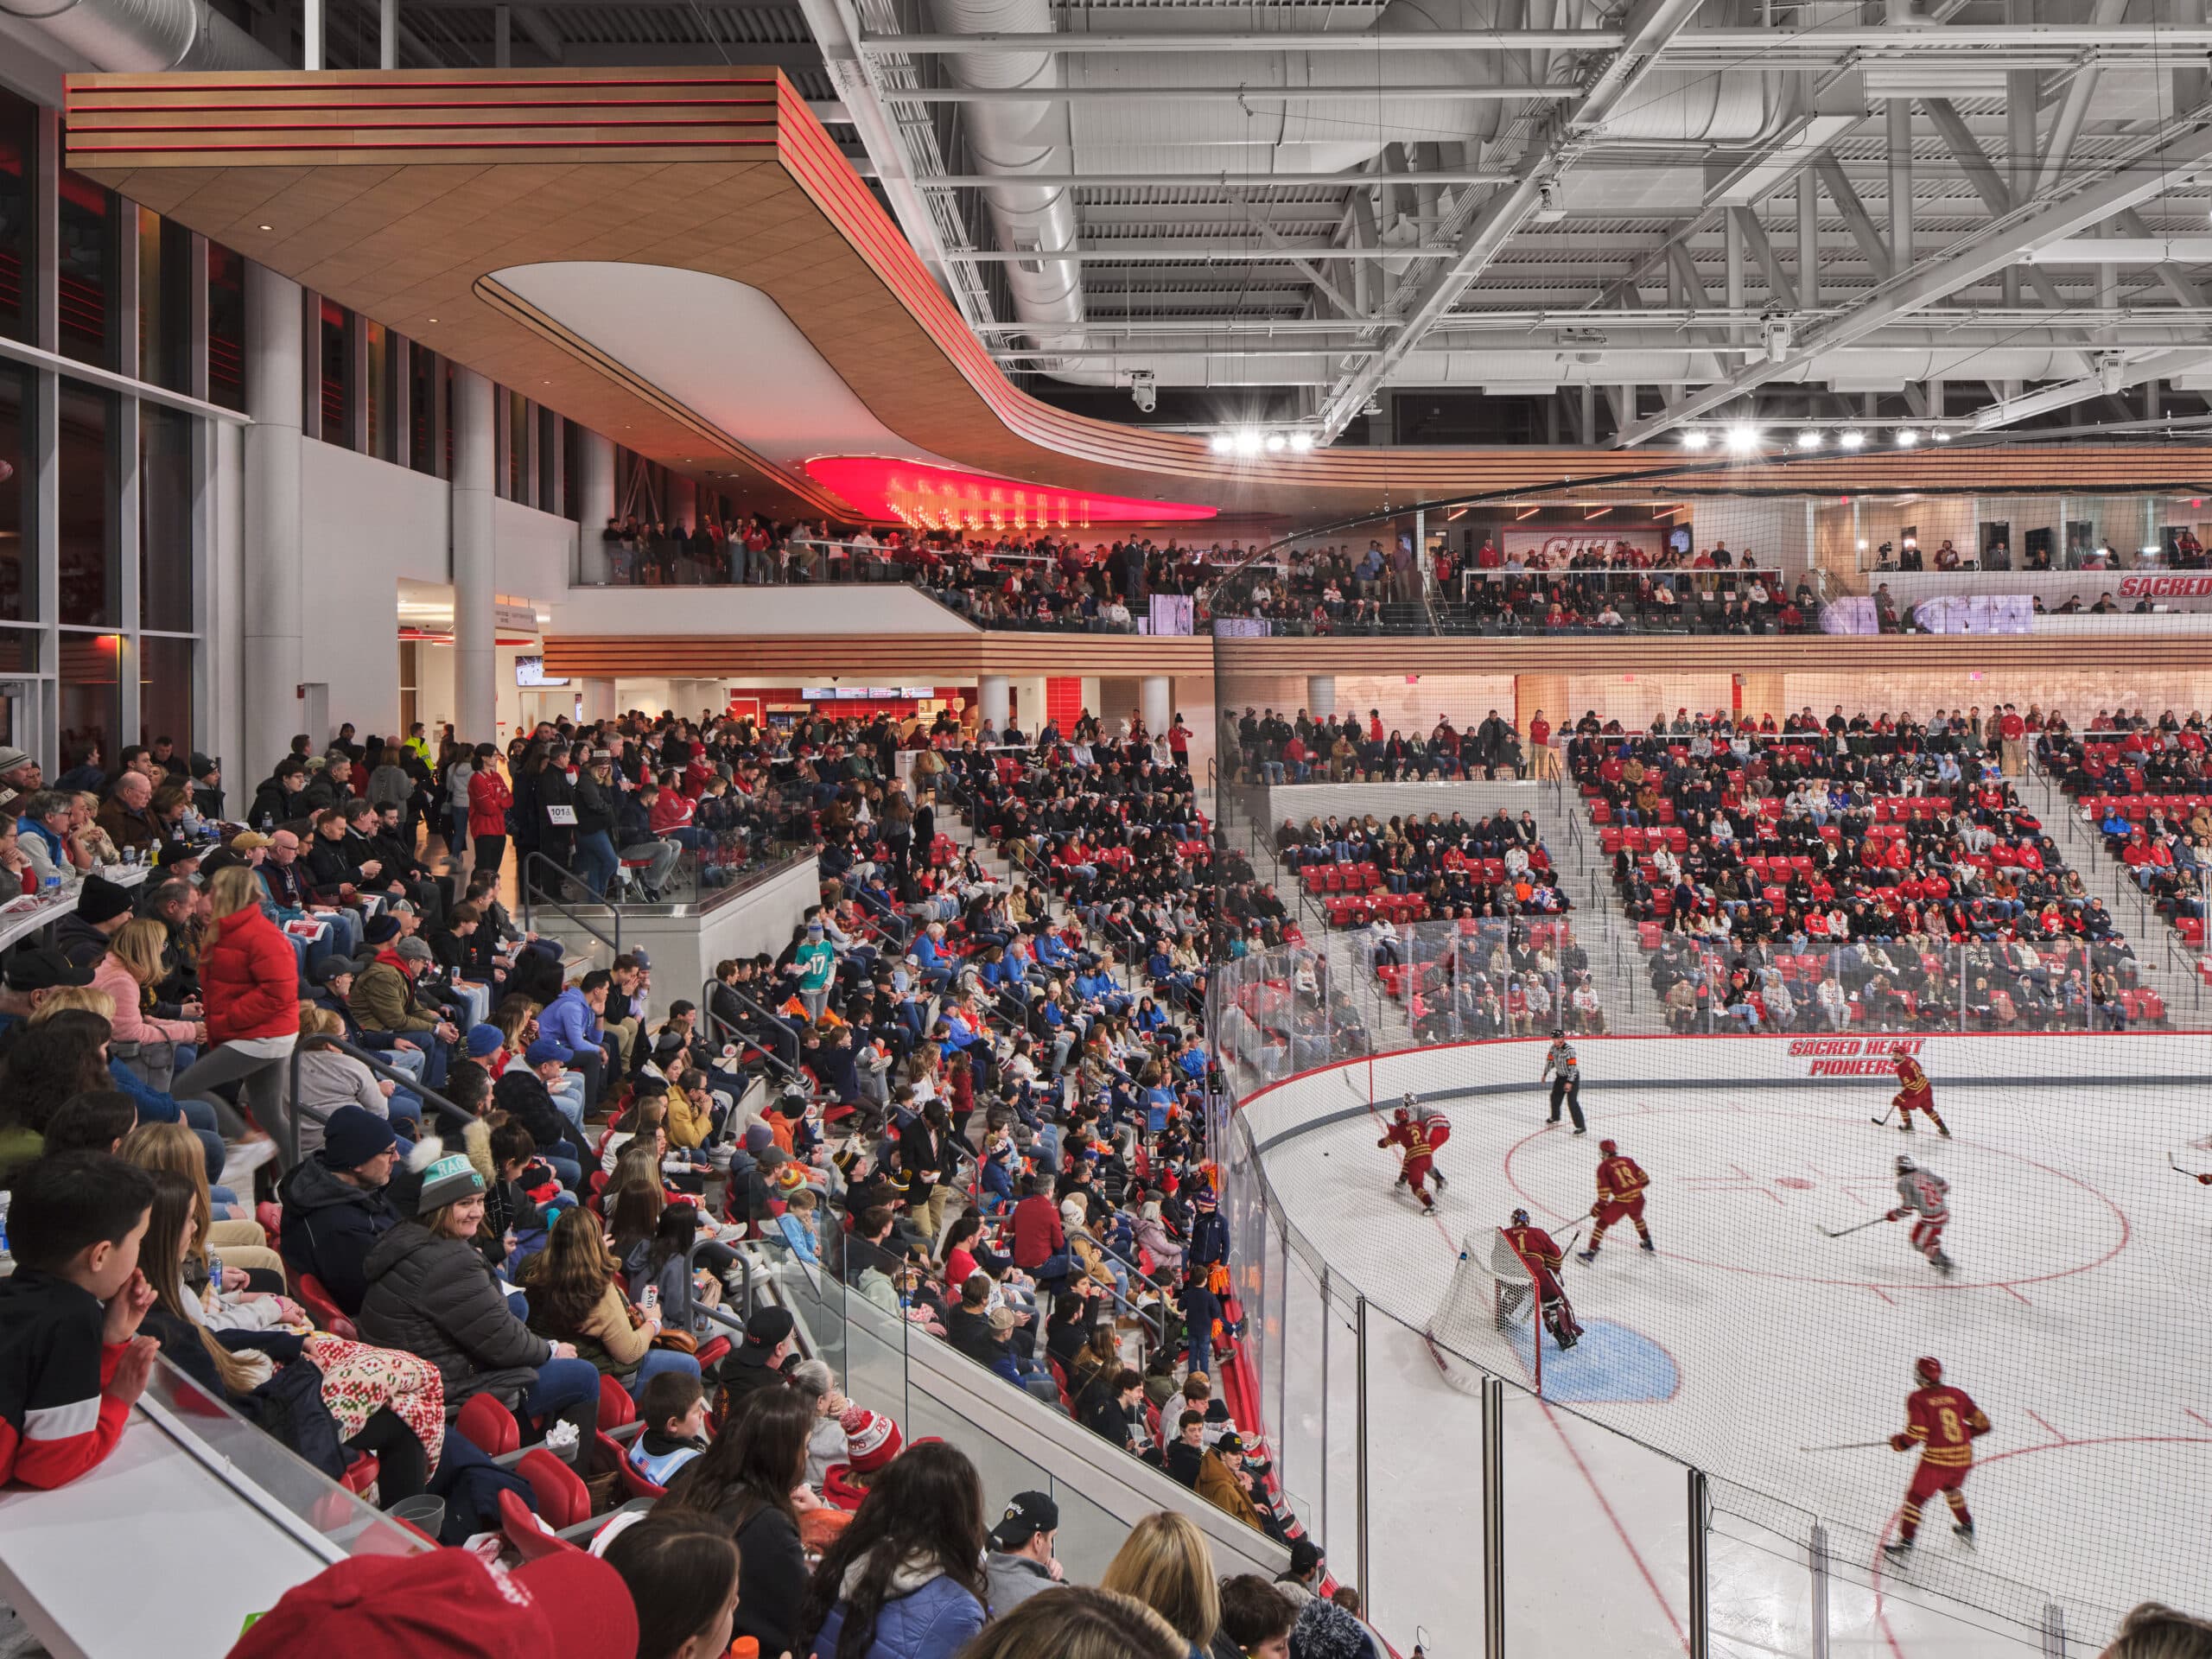 Sacred Heart's new hockey arena to open this weekend